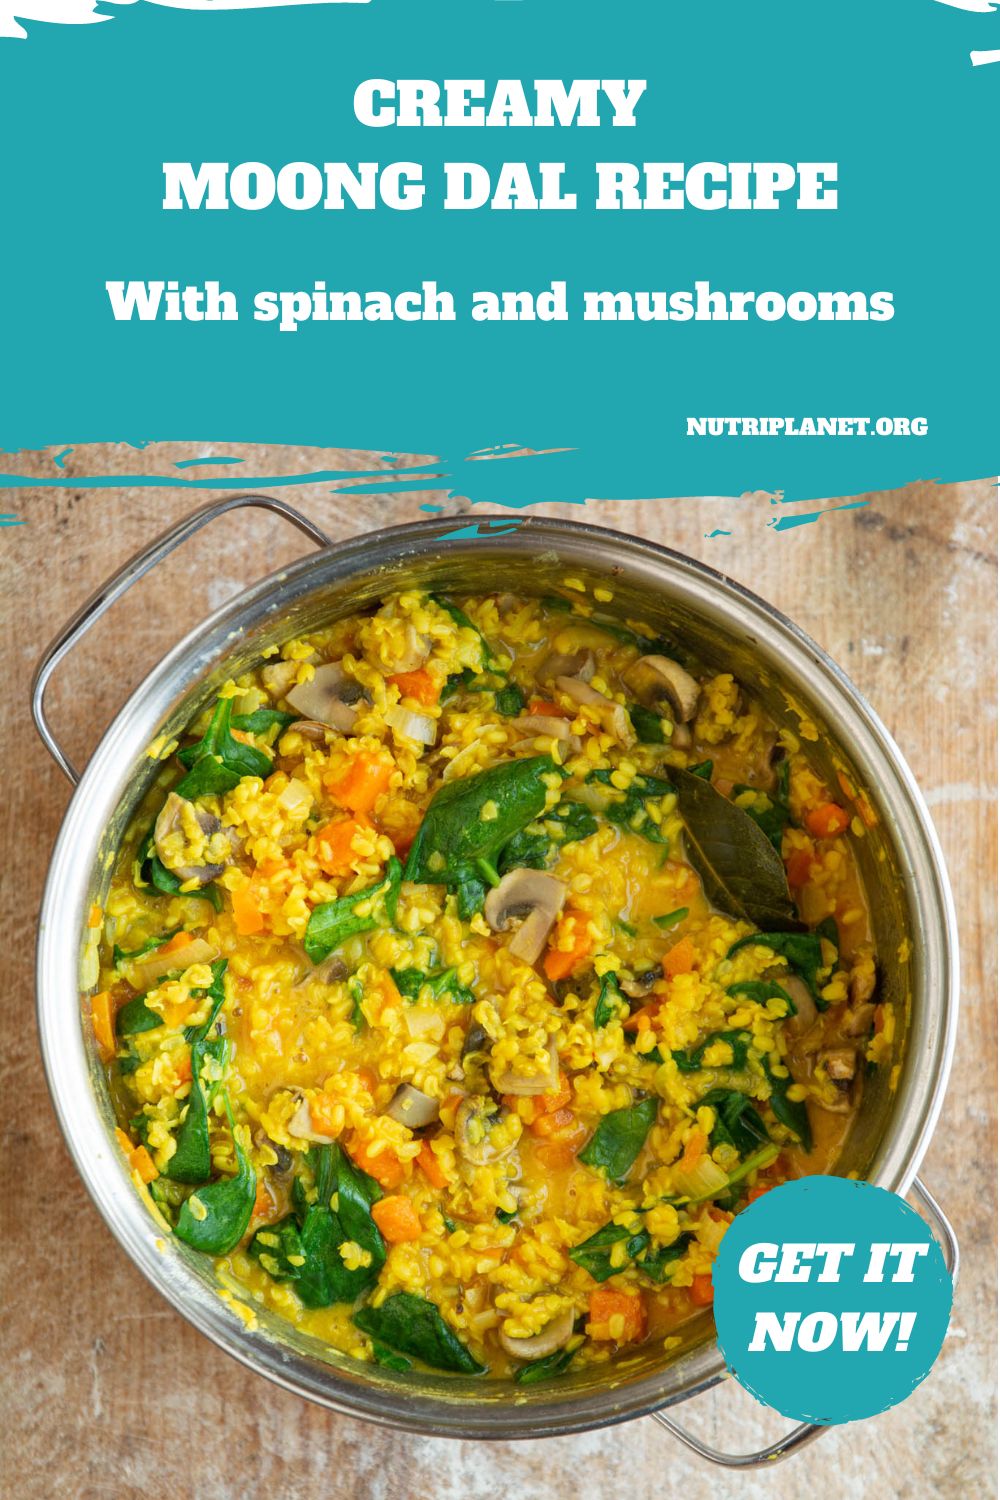 This creamy moong dal recipe with spinach and mushrooms is a great weekday meal accompanied by green salad and rice or pasta. 